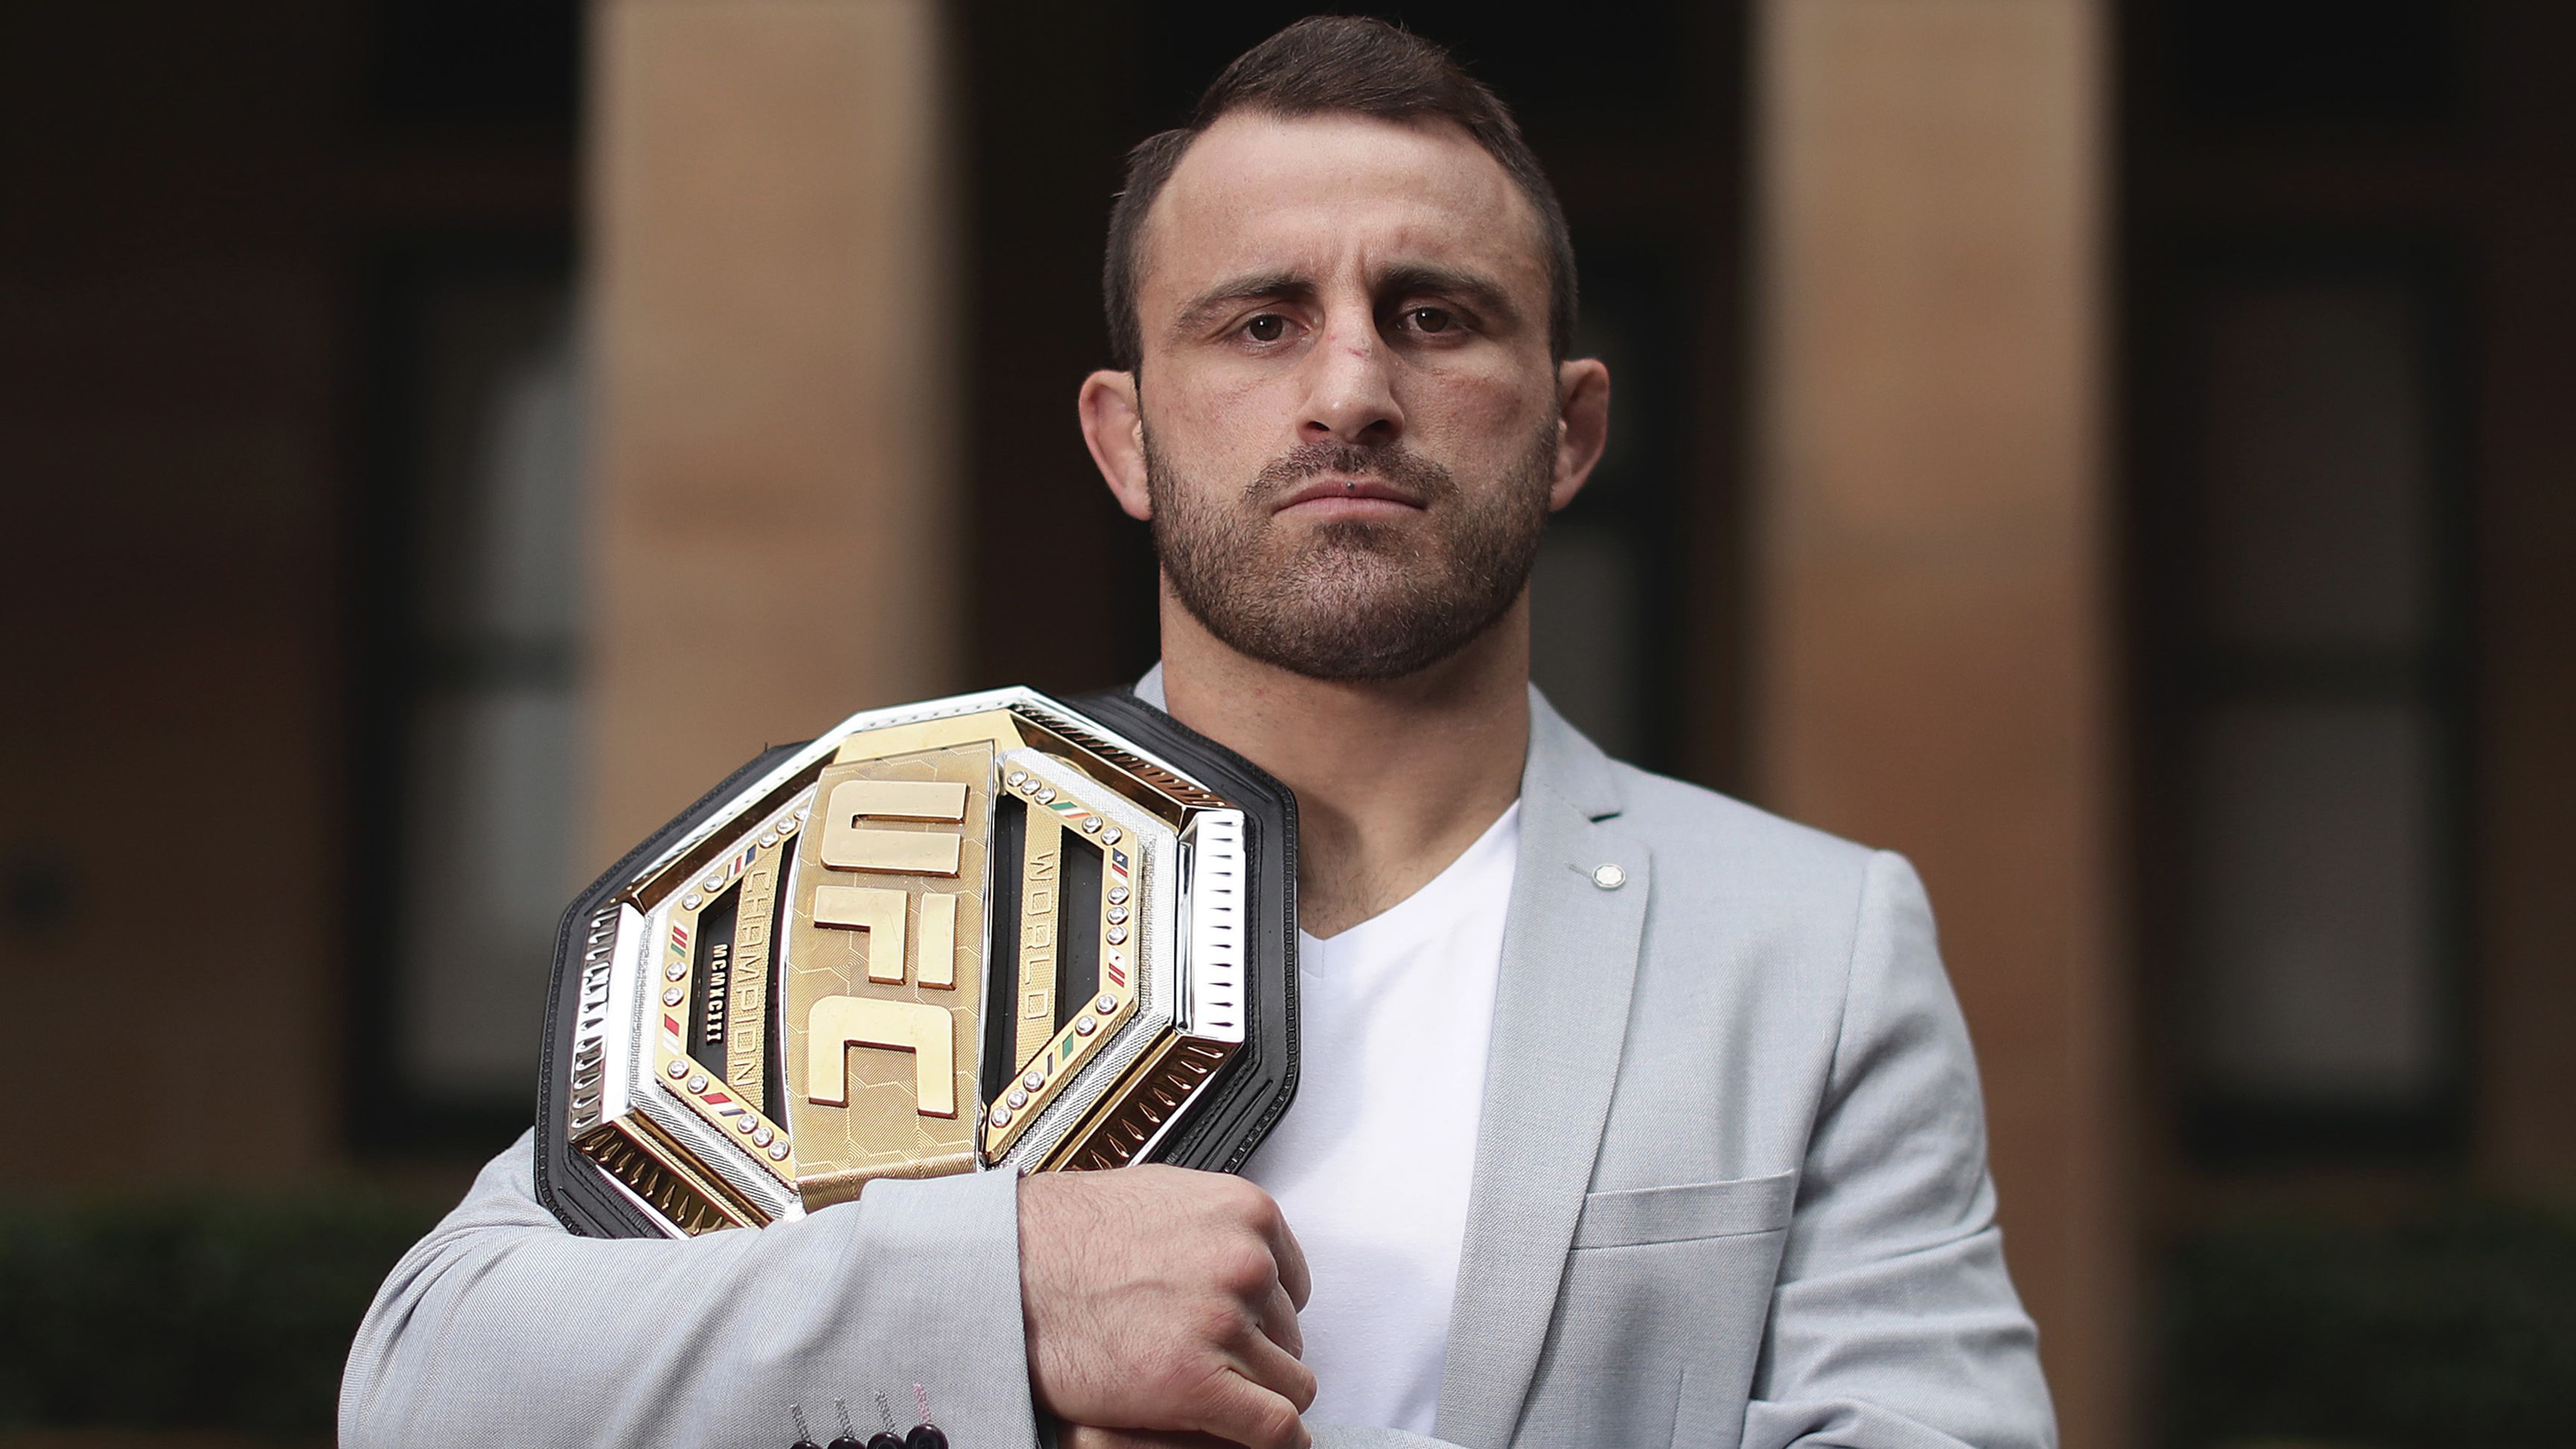 EXCLUSIVE: Alexander Volkanovski speaks after being named as a coach on next season of The Ultimate Fighter